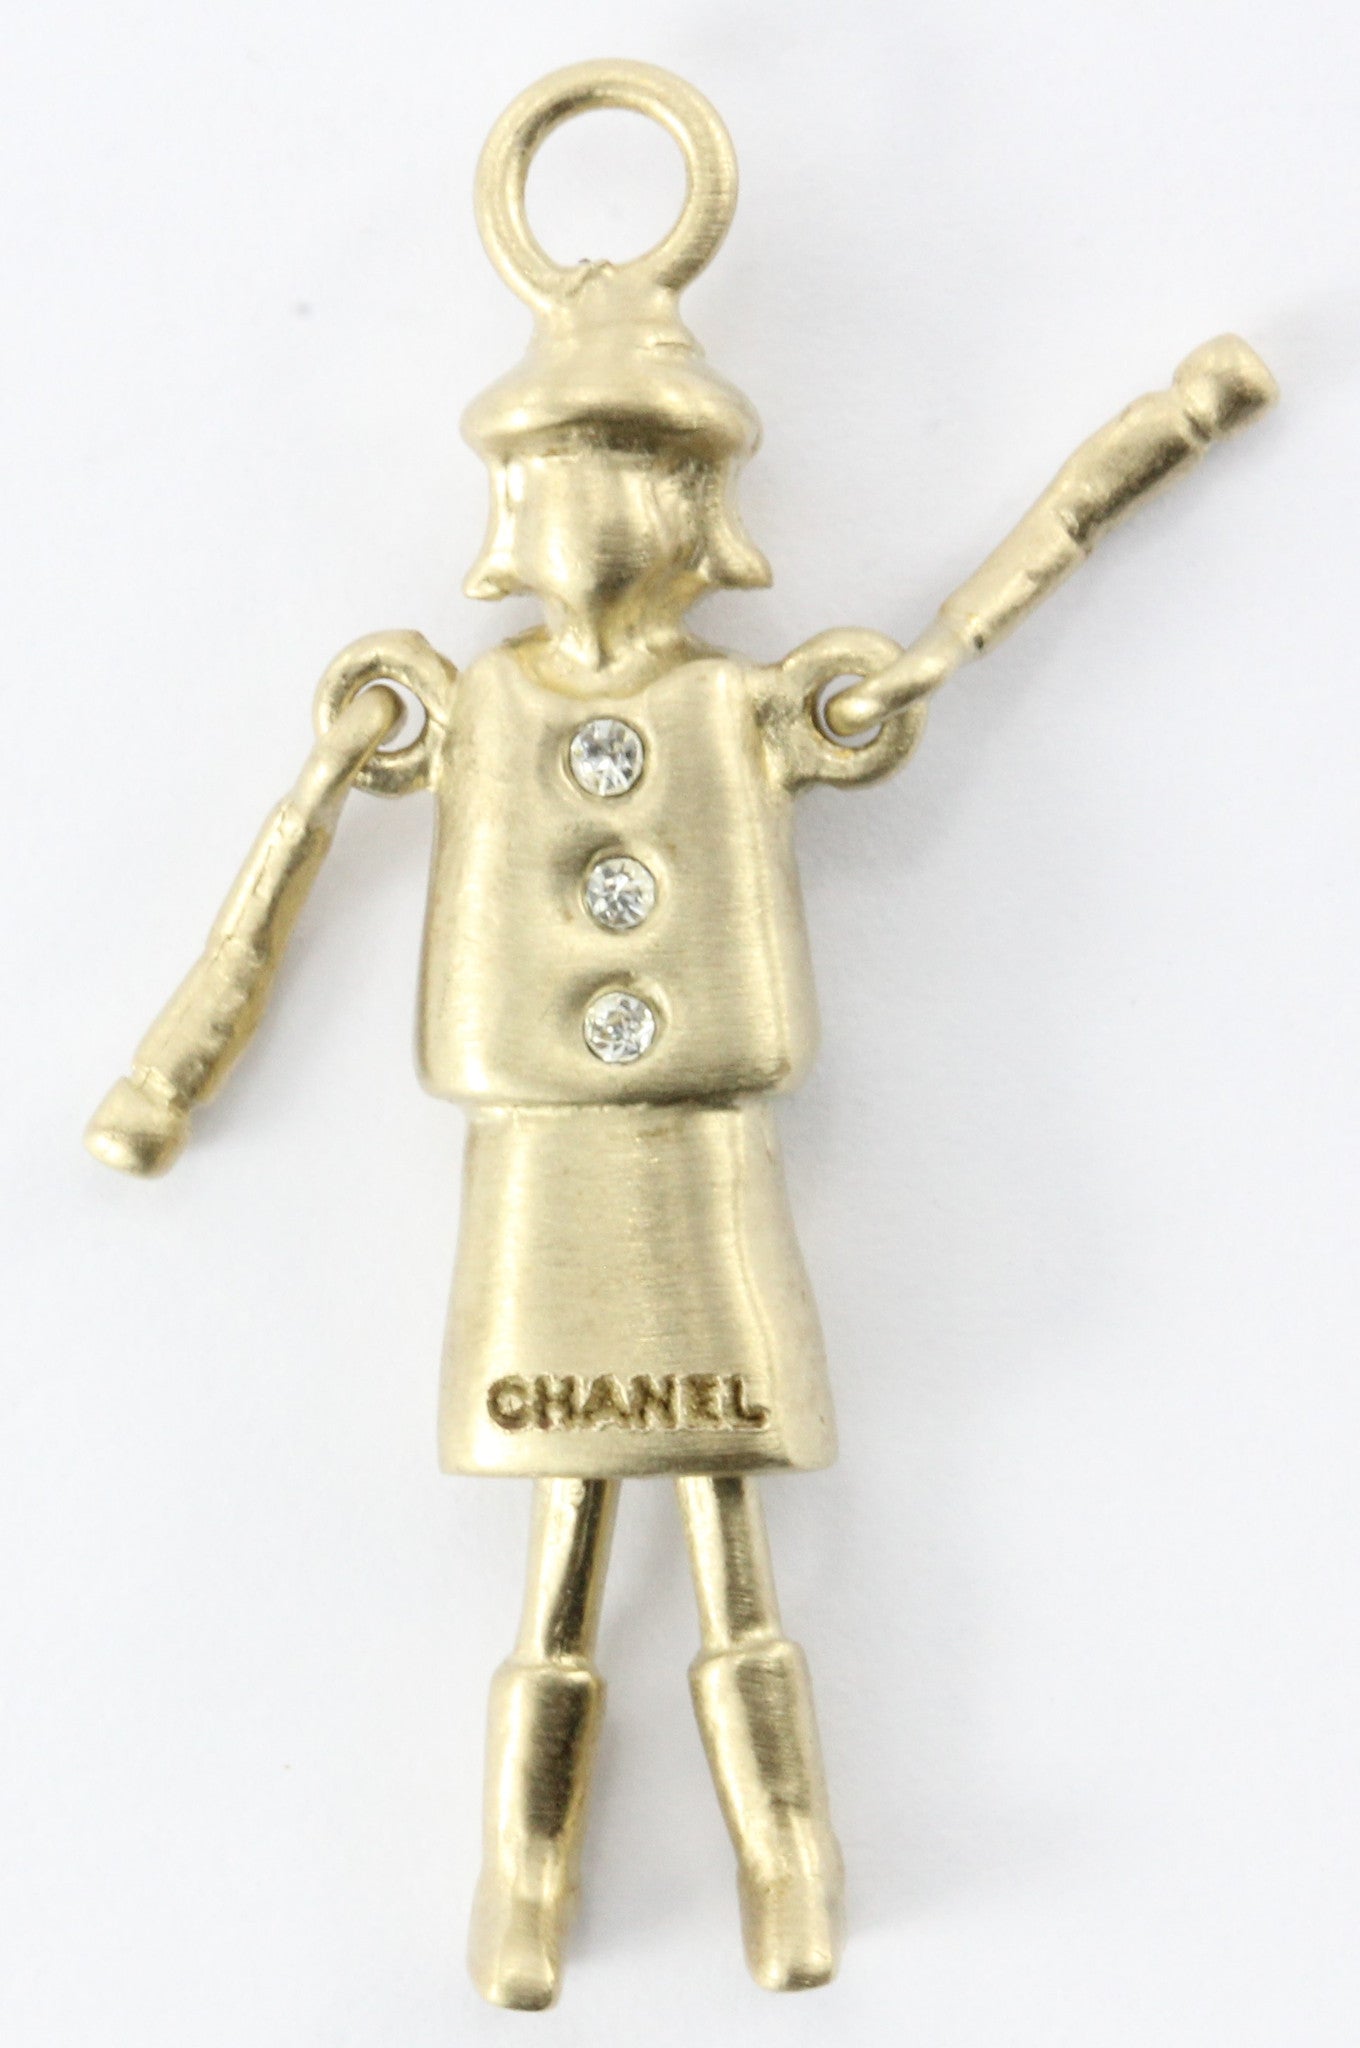 CHANEL Lady Coco Charm / Pendant Silver Tone w/ crystal Buttons